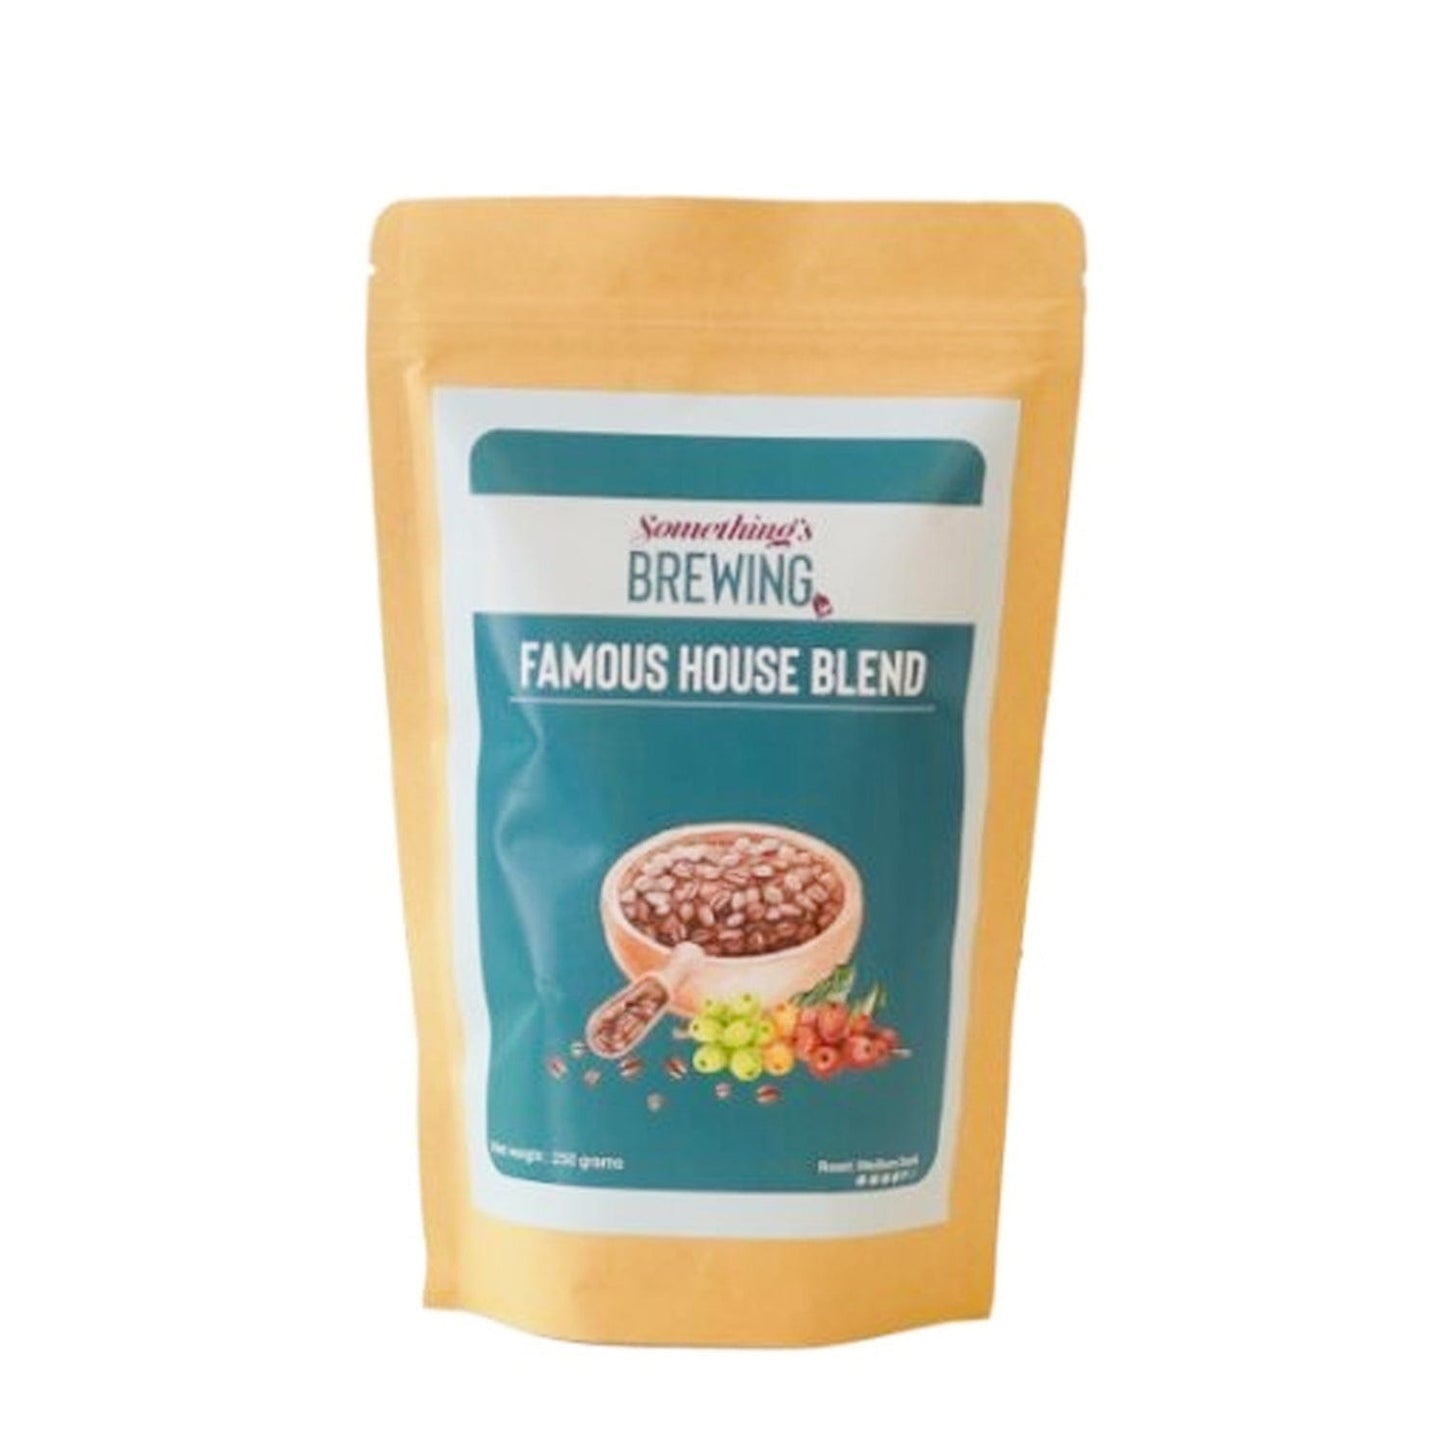 Somethings Brewing Store Roaster Something's Brewing Famous House Blend (1kg)